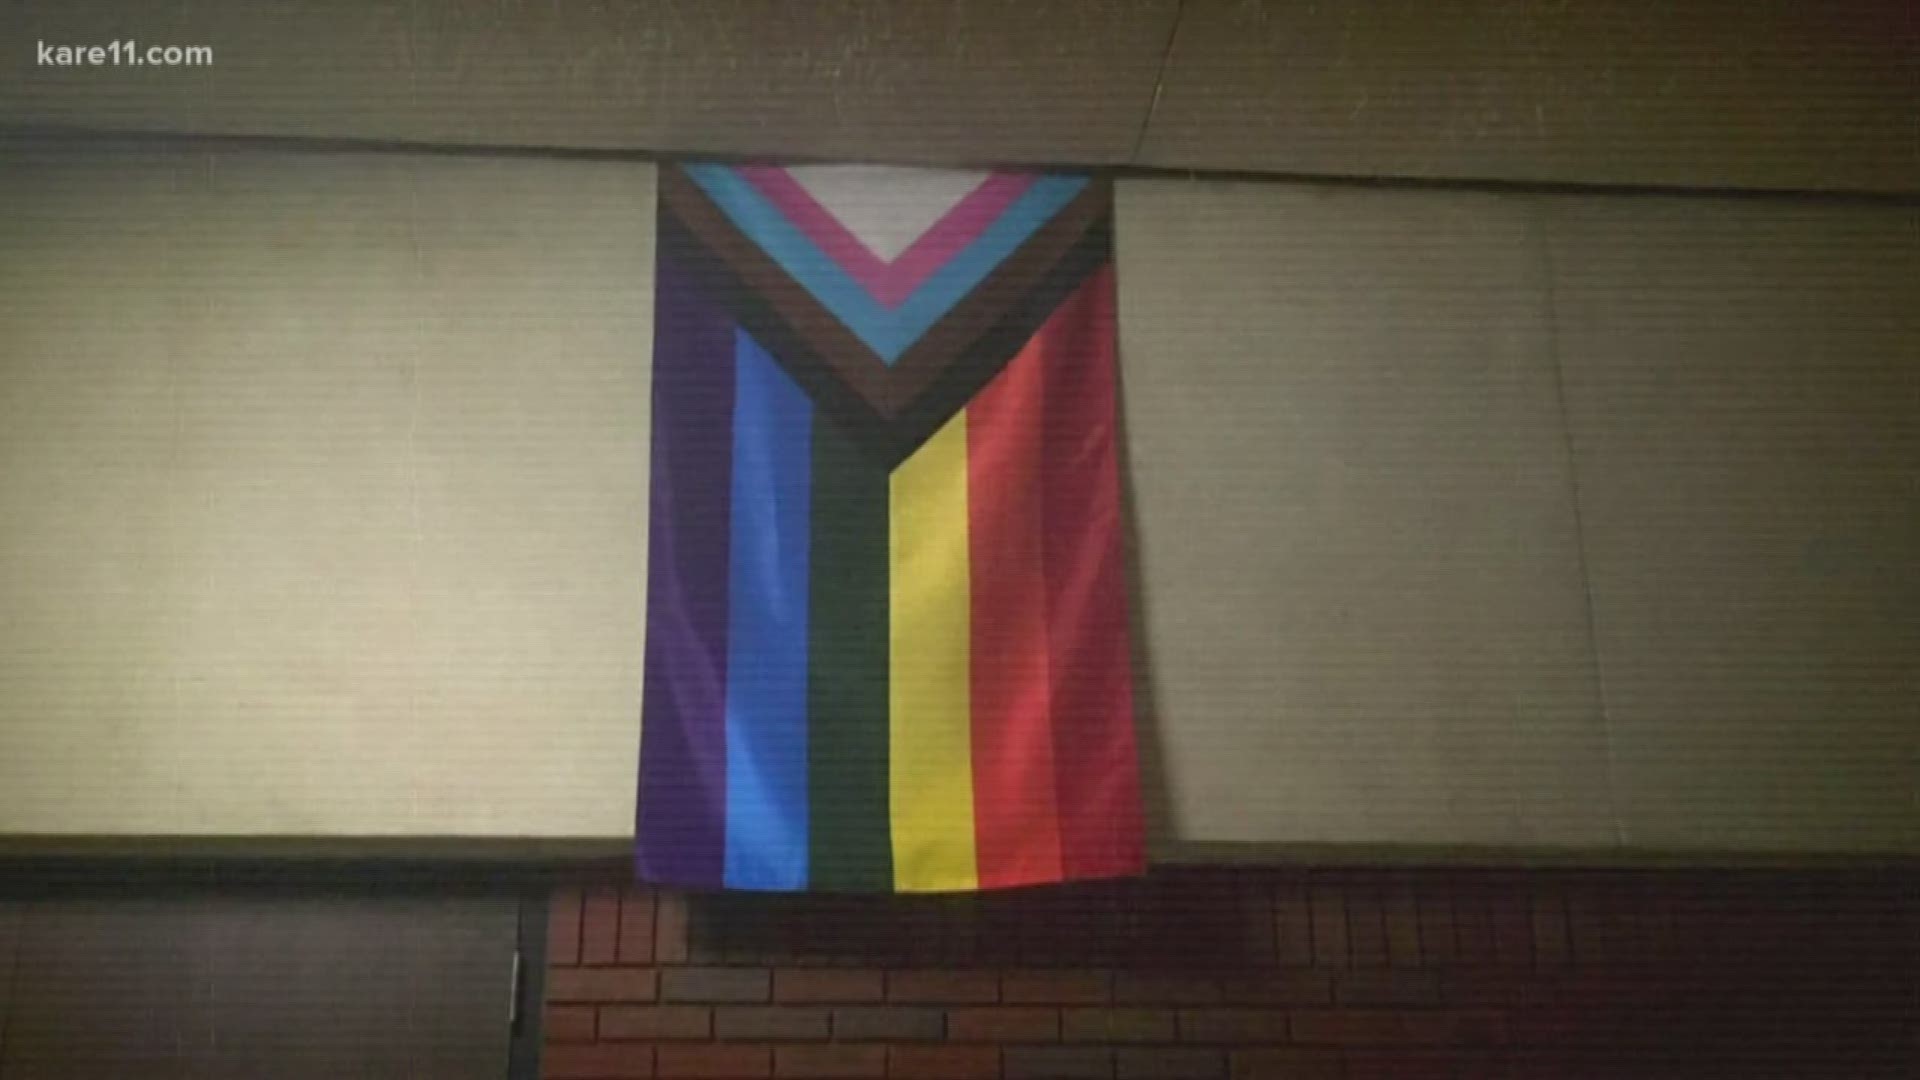 A display featuring a rainbow pride flag in the cafeteria at Marshall Middle School led to a lengthy community discussion at a school board meeting